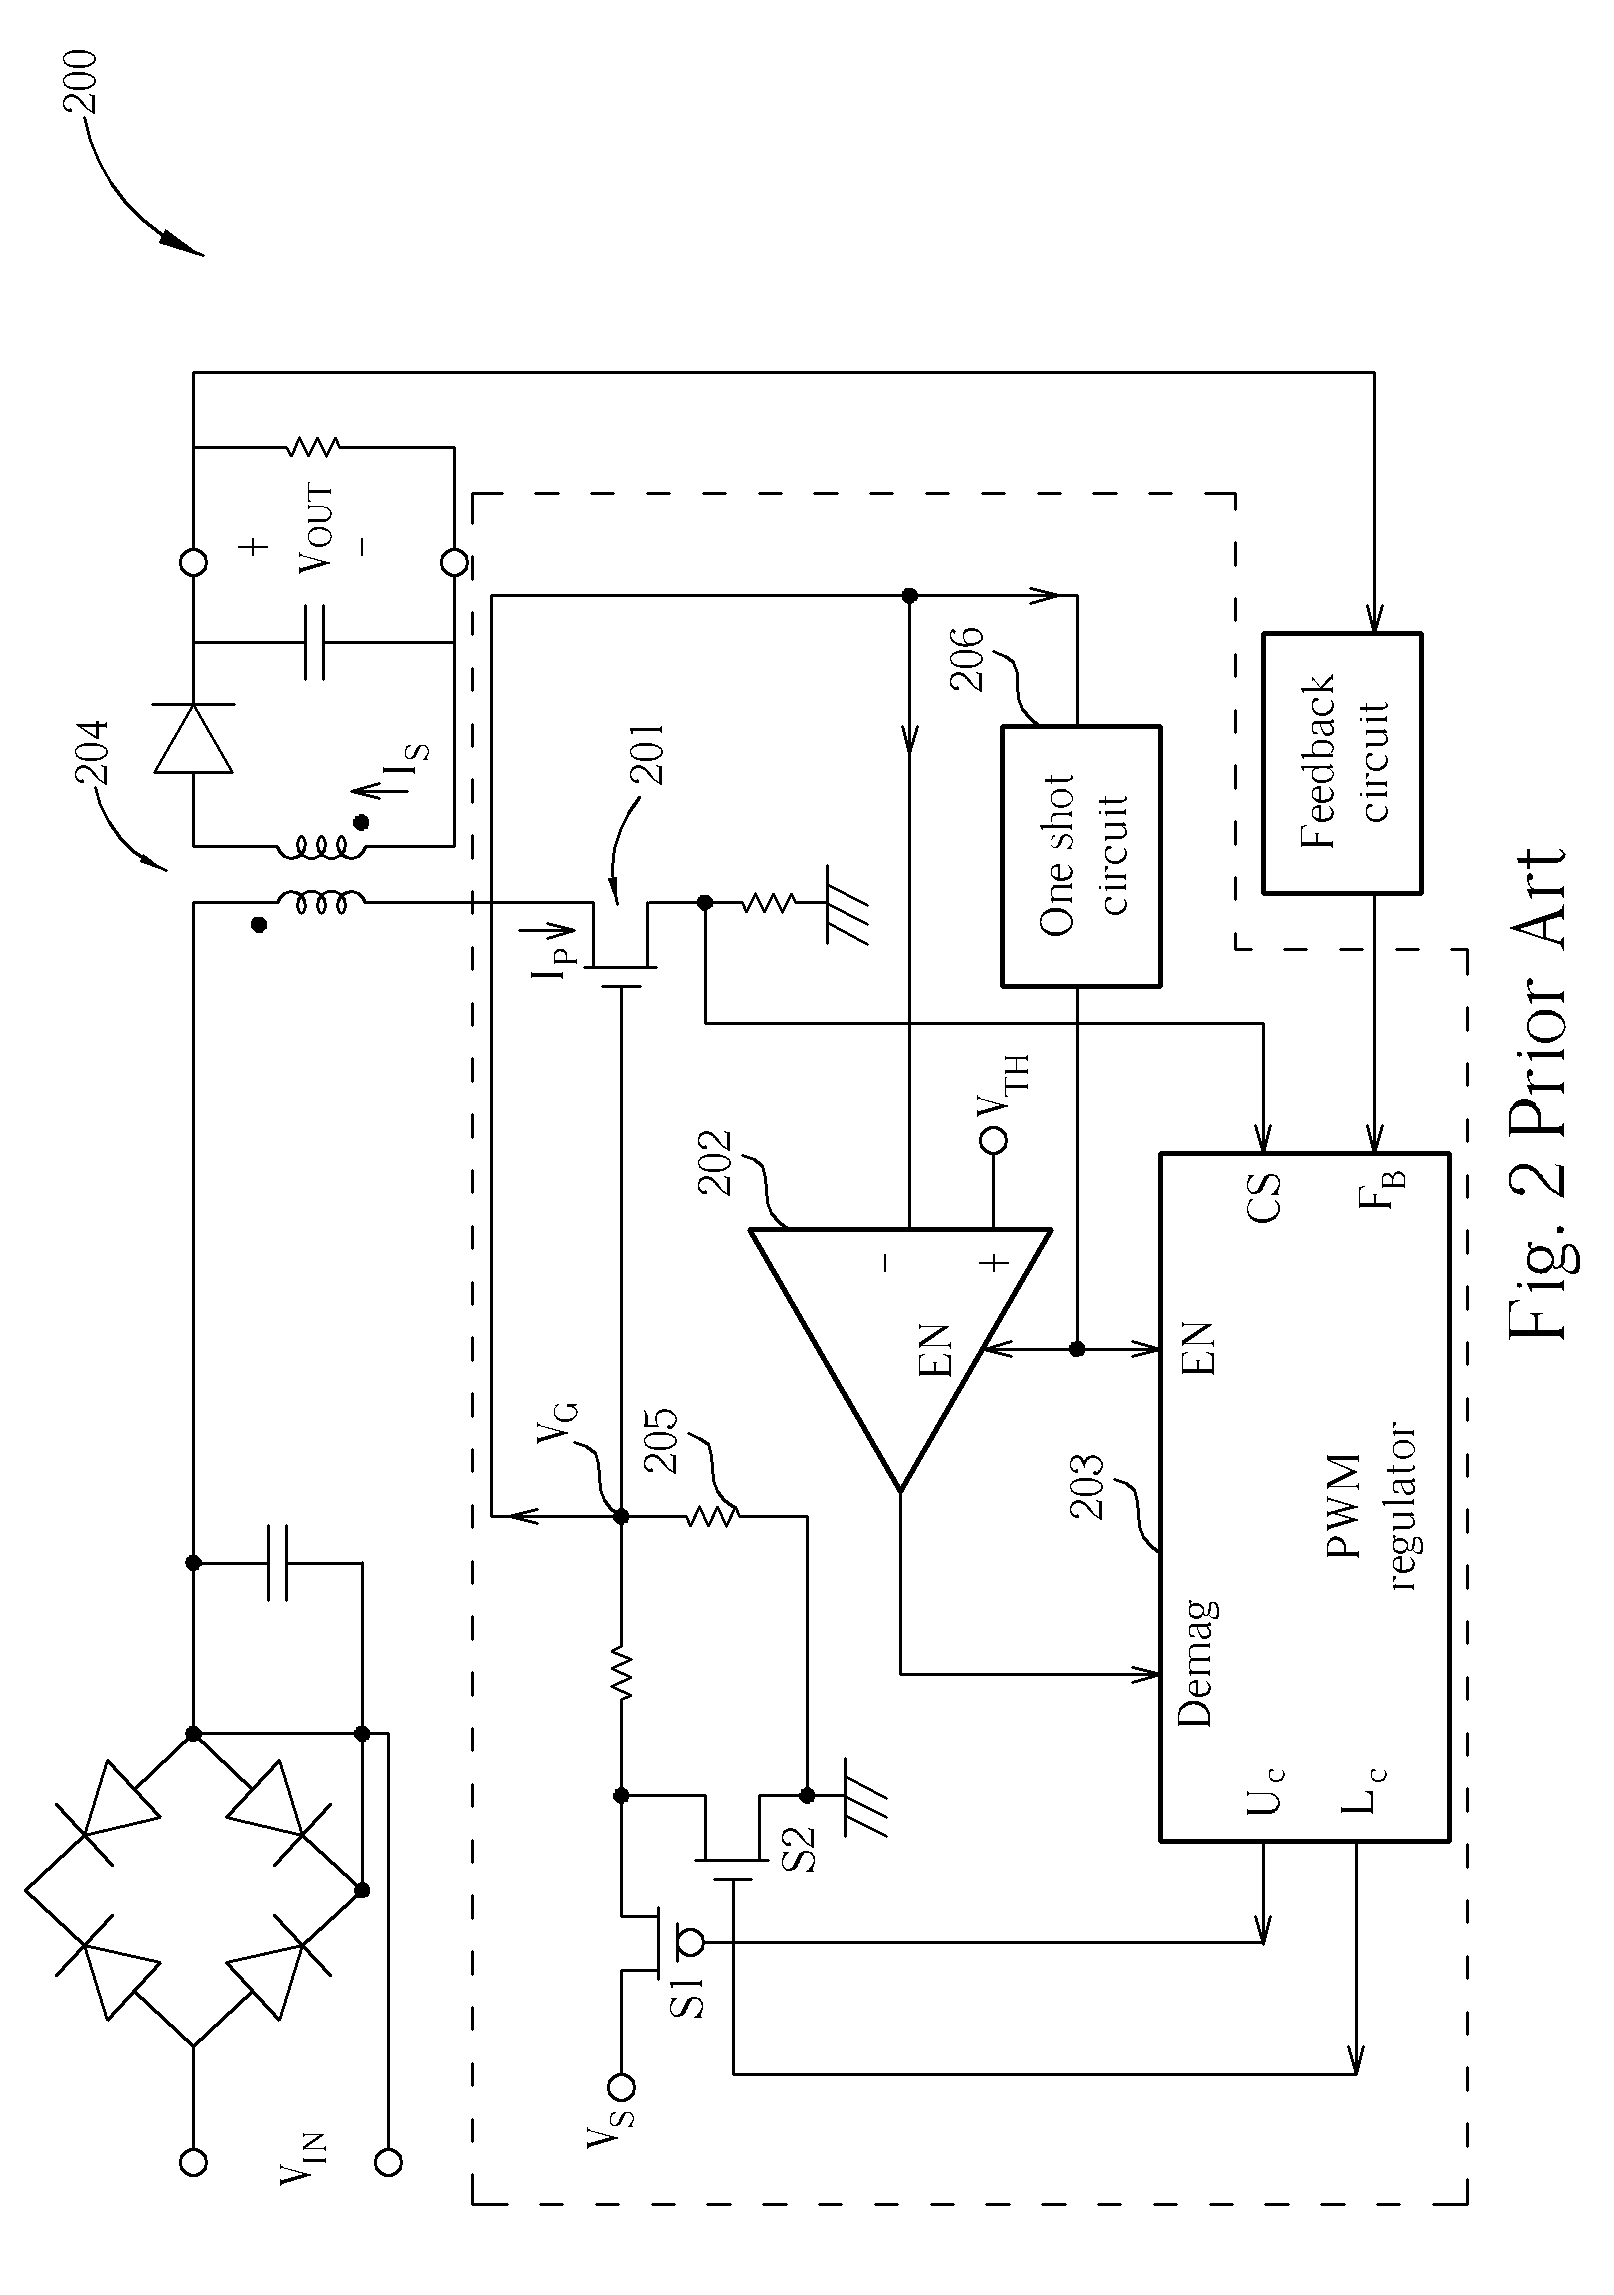 Quasi-resonant fly-back converter without auxiliary winding